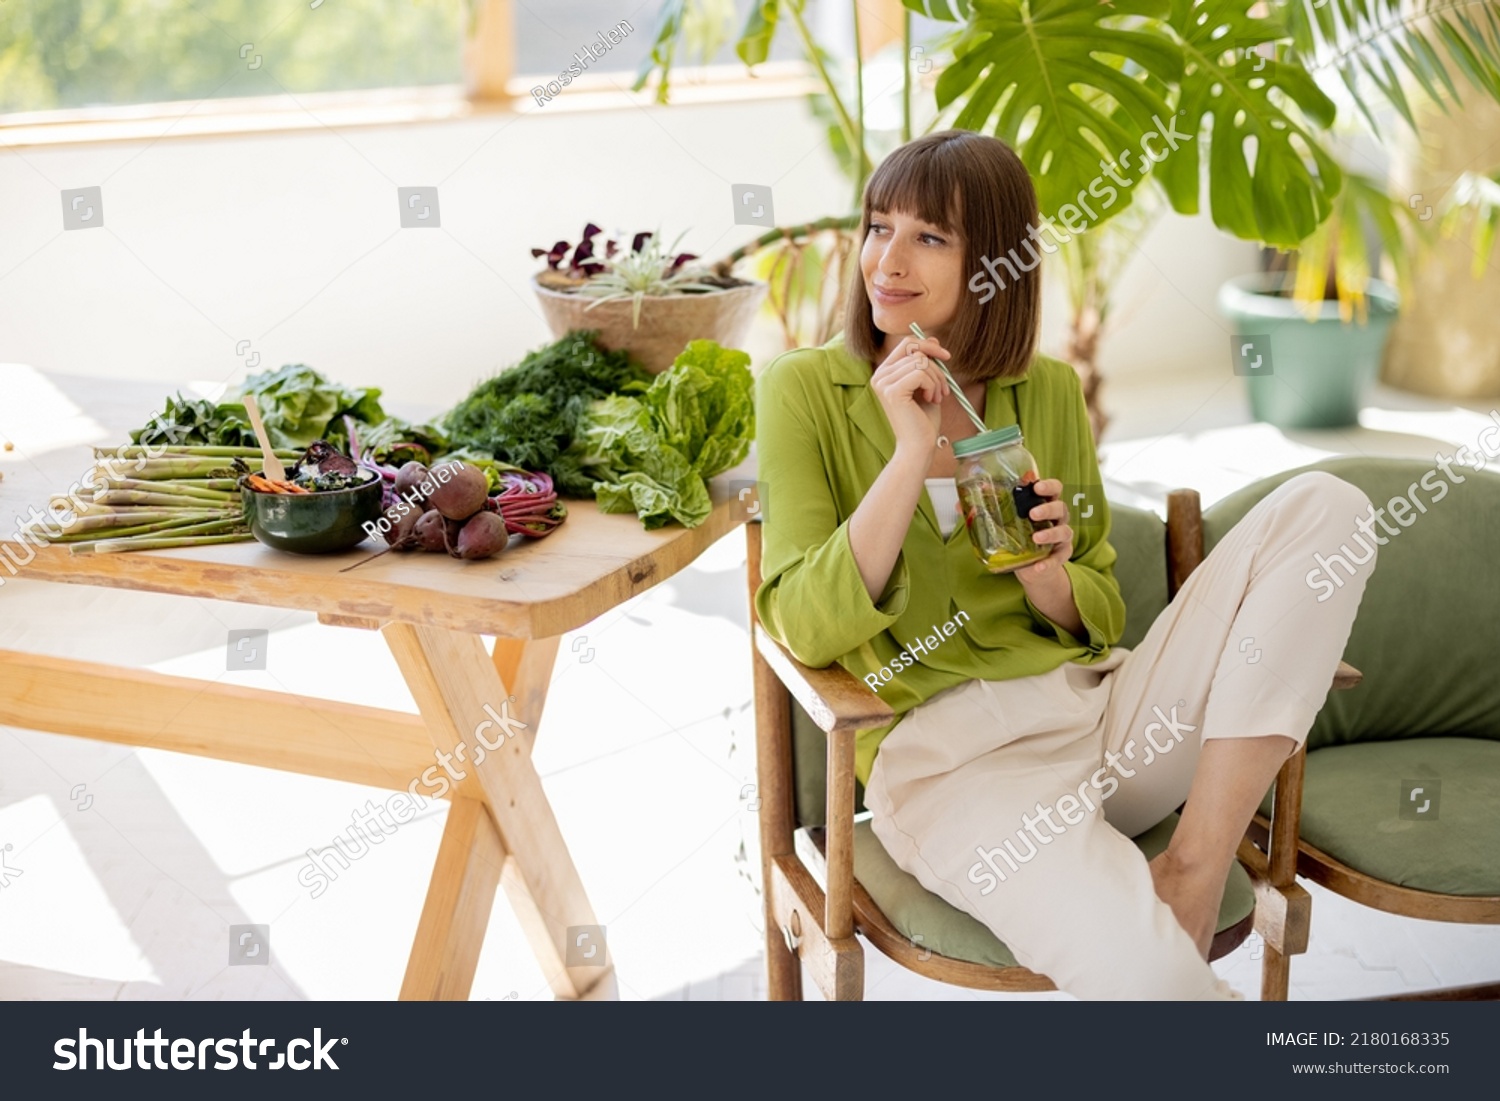 Young woman drinks lemonade while sitting on chair near table with lots of fresh food ingredients in room with green plants. Healthy lifestyle concept #2180168335